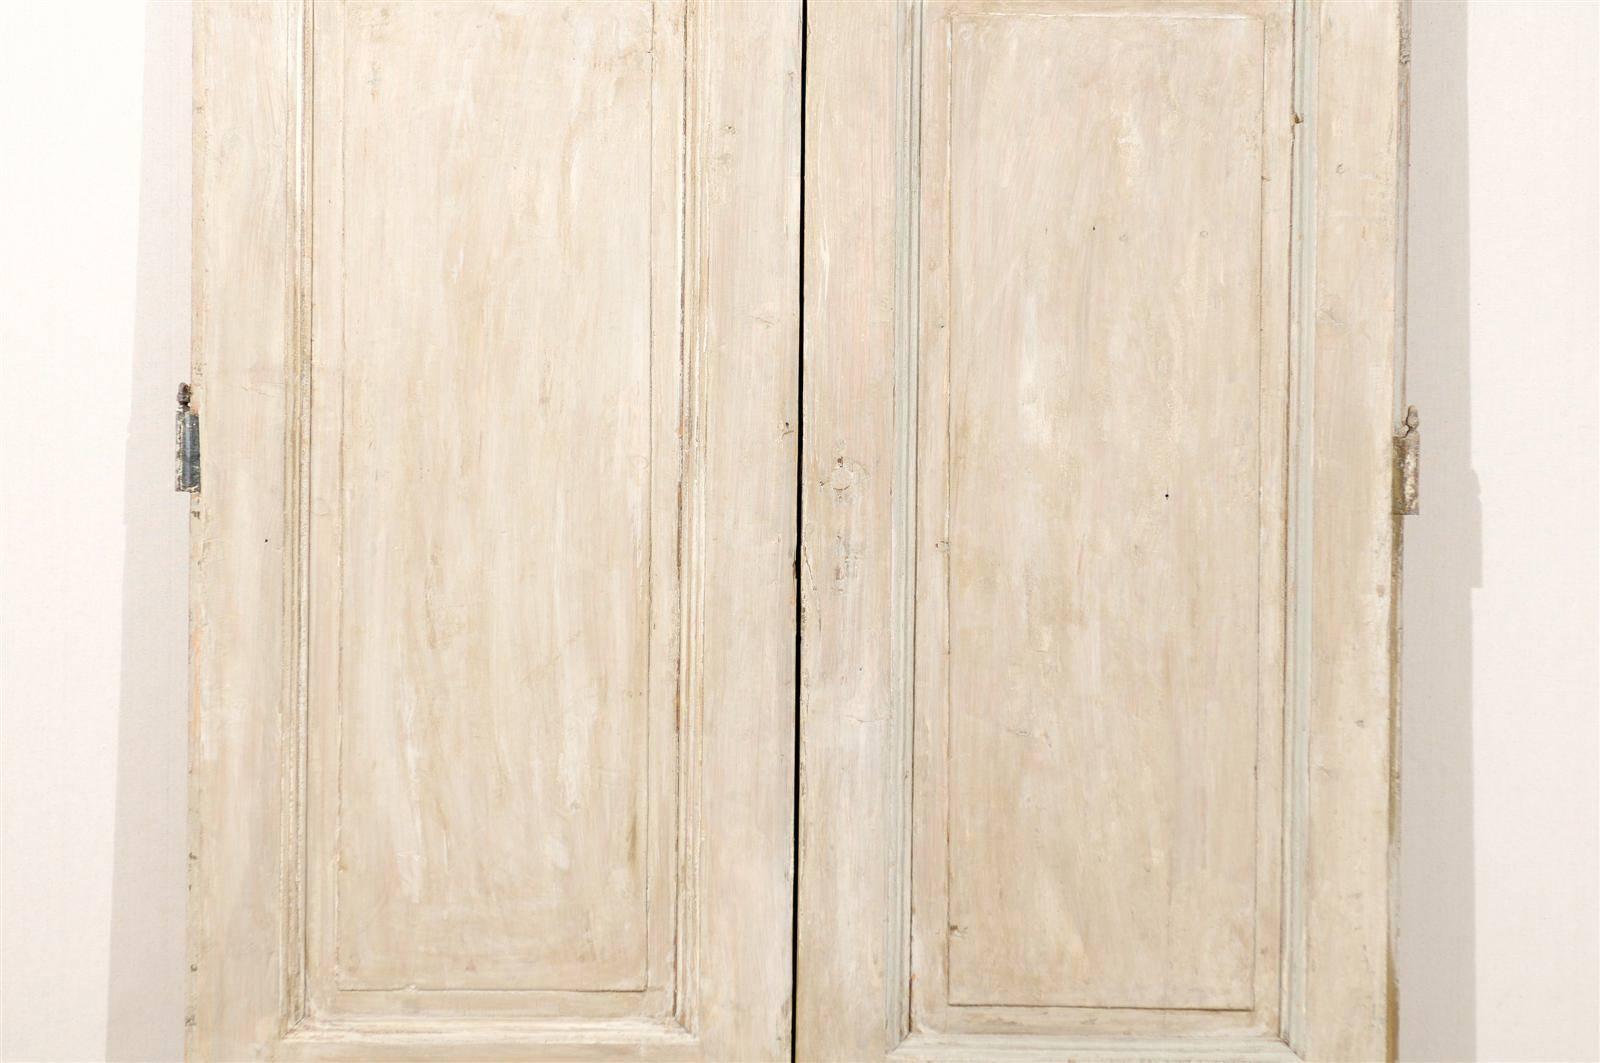 Pair of Tall French Doors from the Mid-19th Century (19. Jahrhundert)